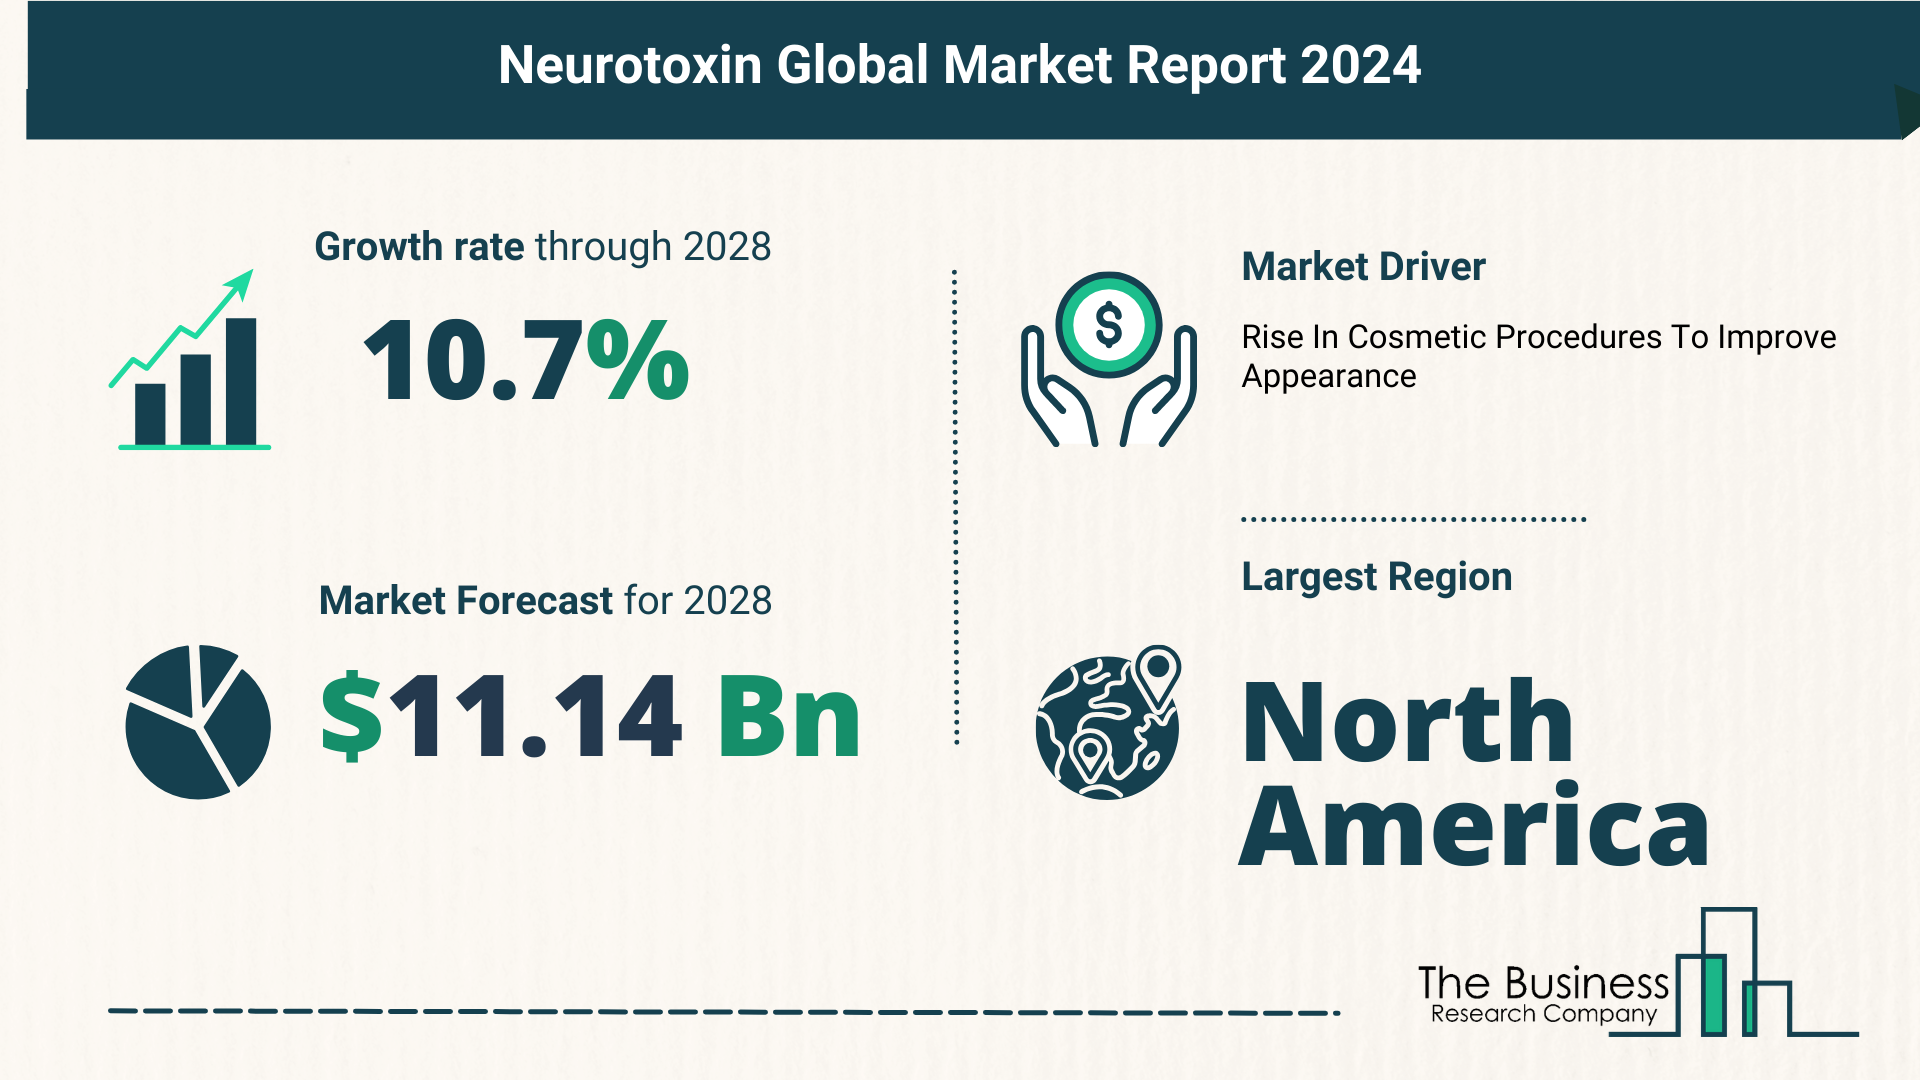 Top 5 Insights From The Neurotoxin Market Report 2024